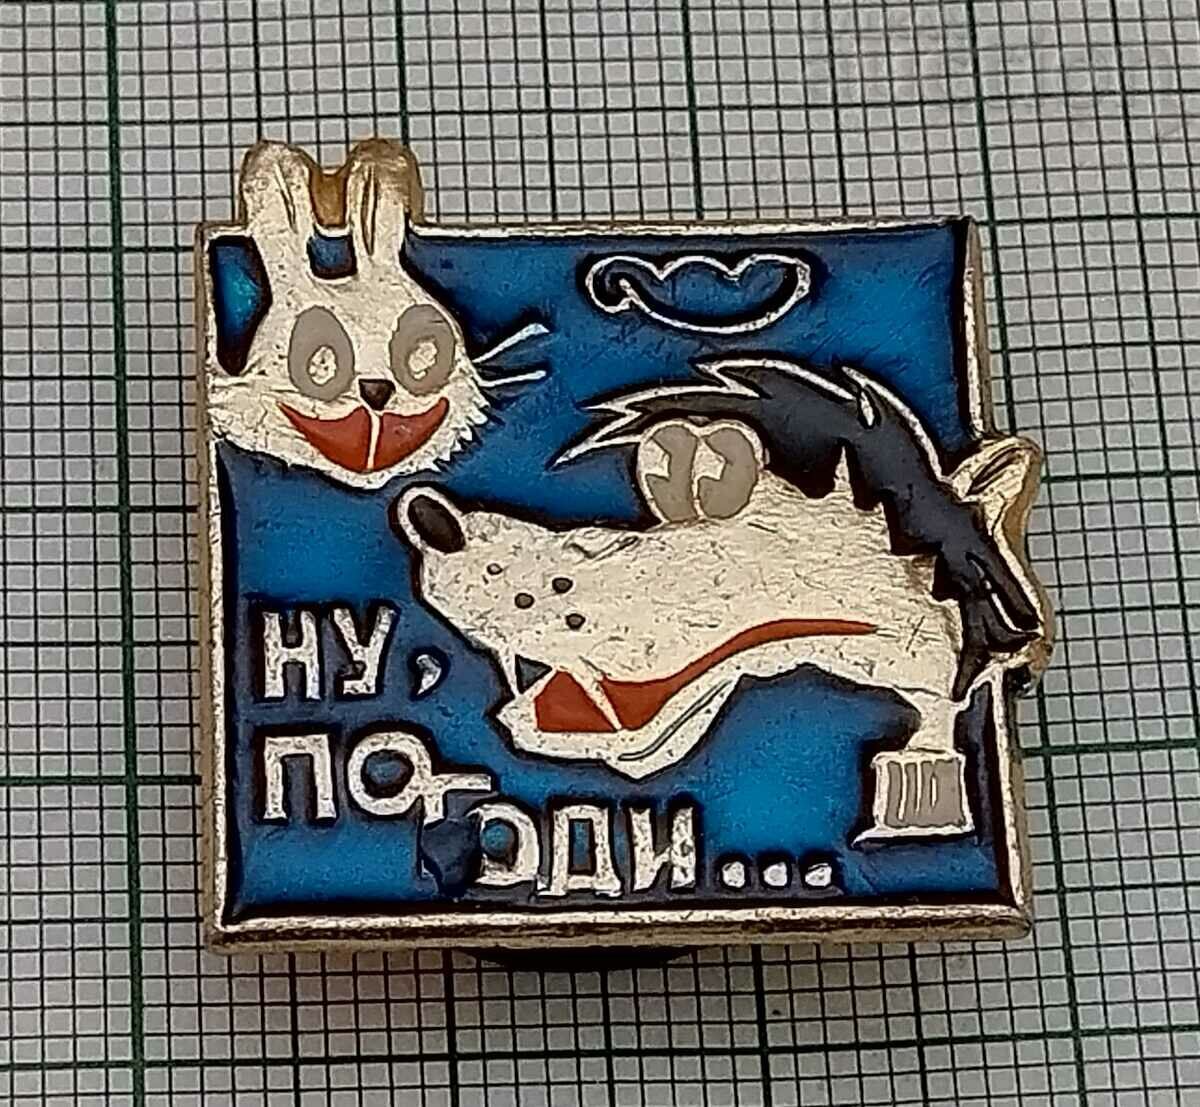 GUESS WOLF RABBIT ANIMATION INSIGNA RUSIA